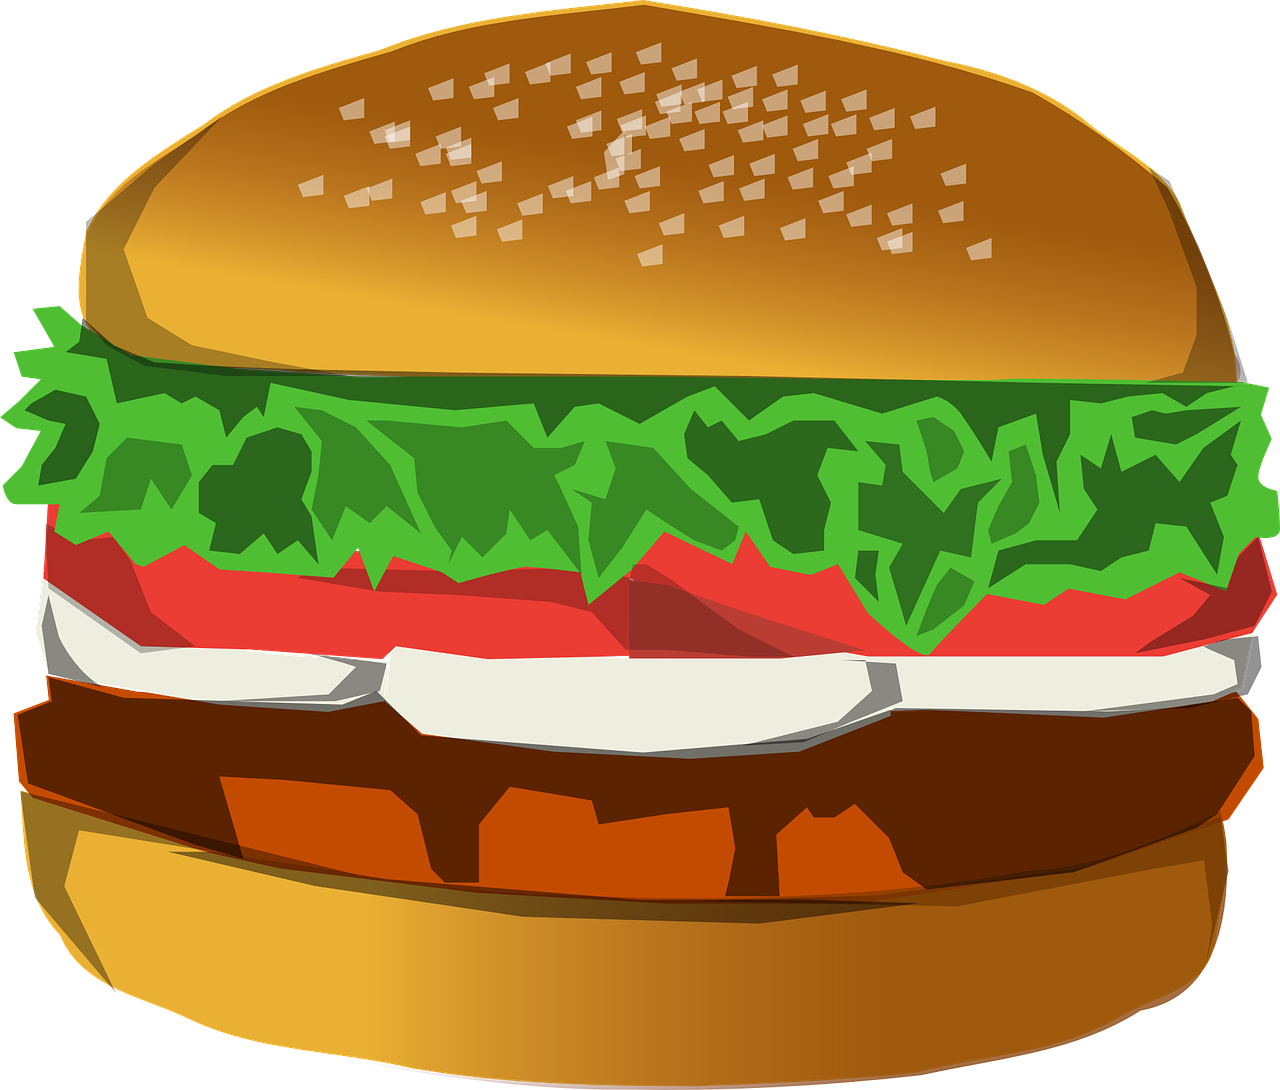 hamburger,burger,food,meal,sandwich,cheeseburger,lunch,layers,bun,fast food,delicious,free vector graphics,free pictures, free photos, free images, royalty free, free illustrations, public domain